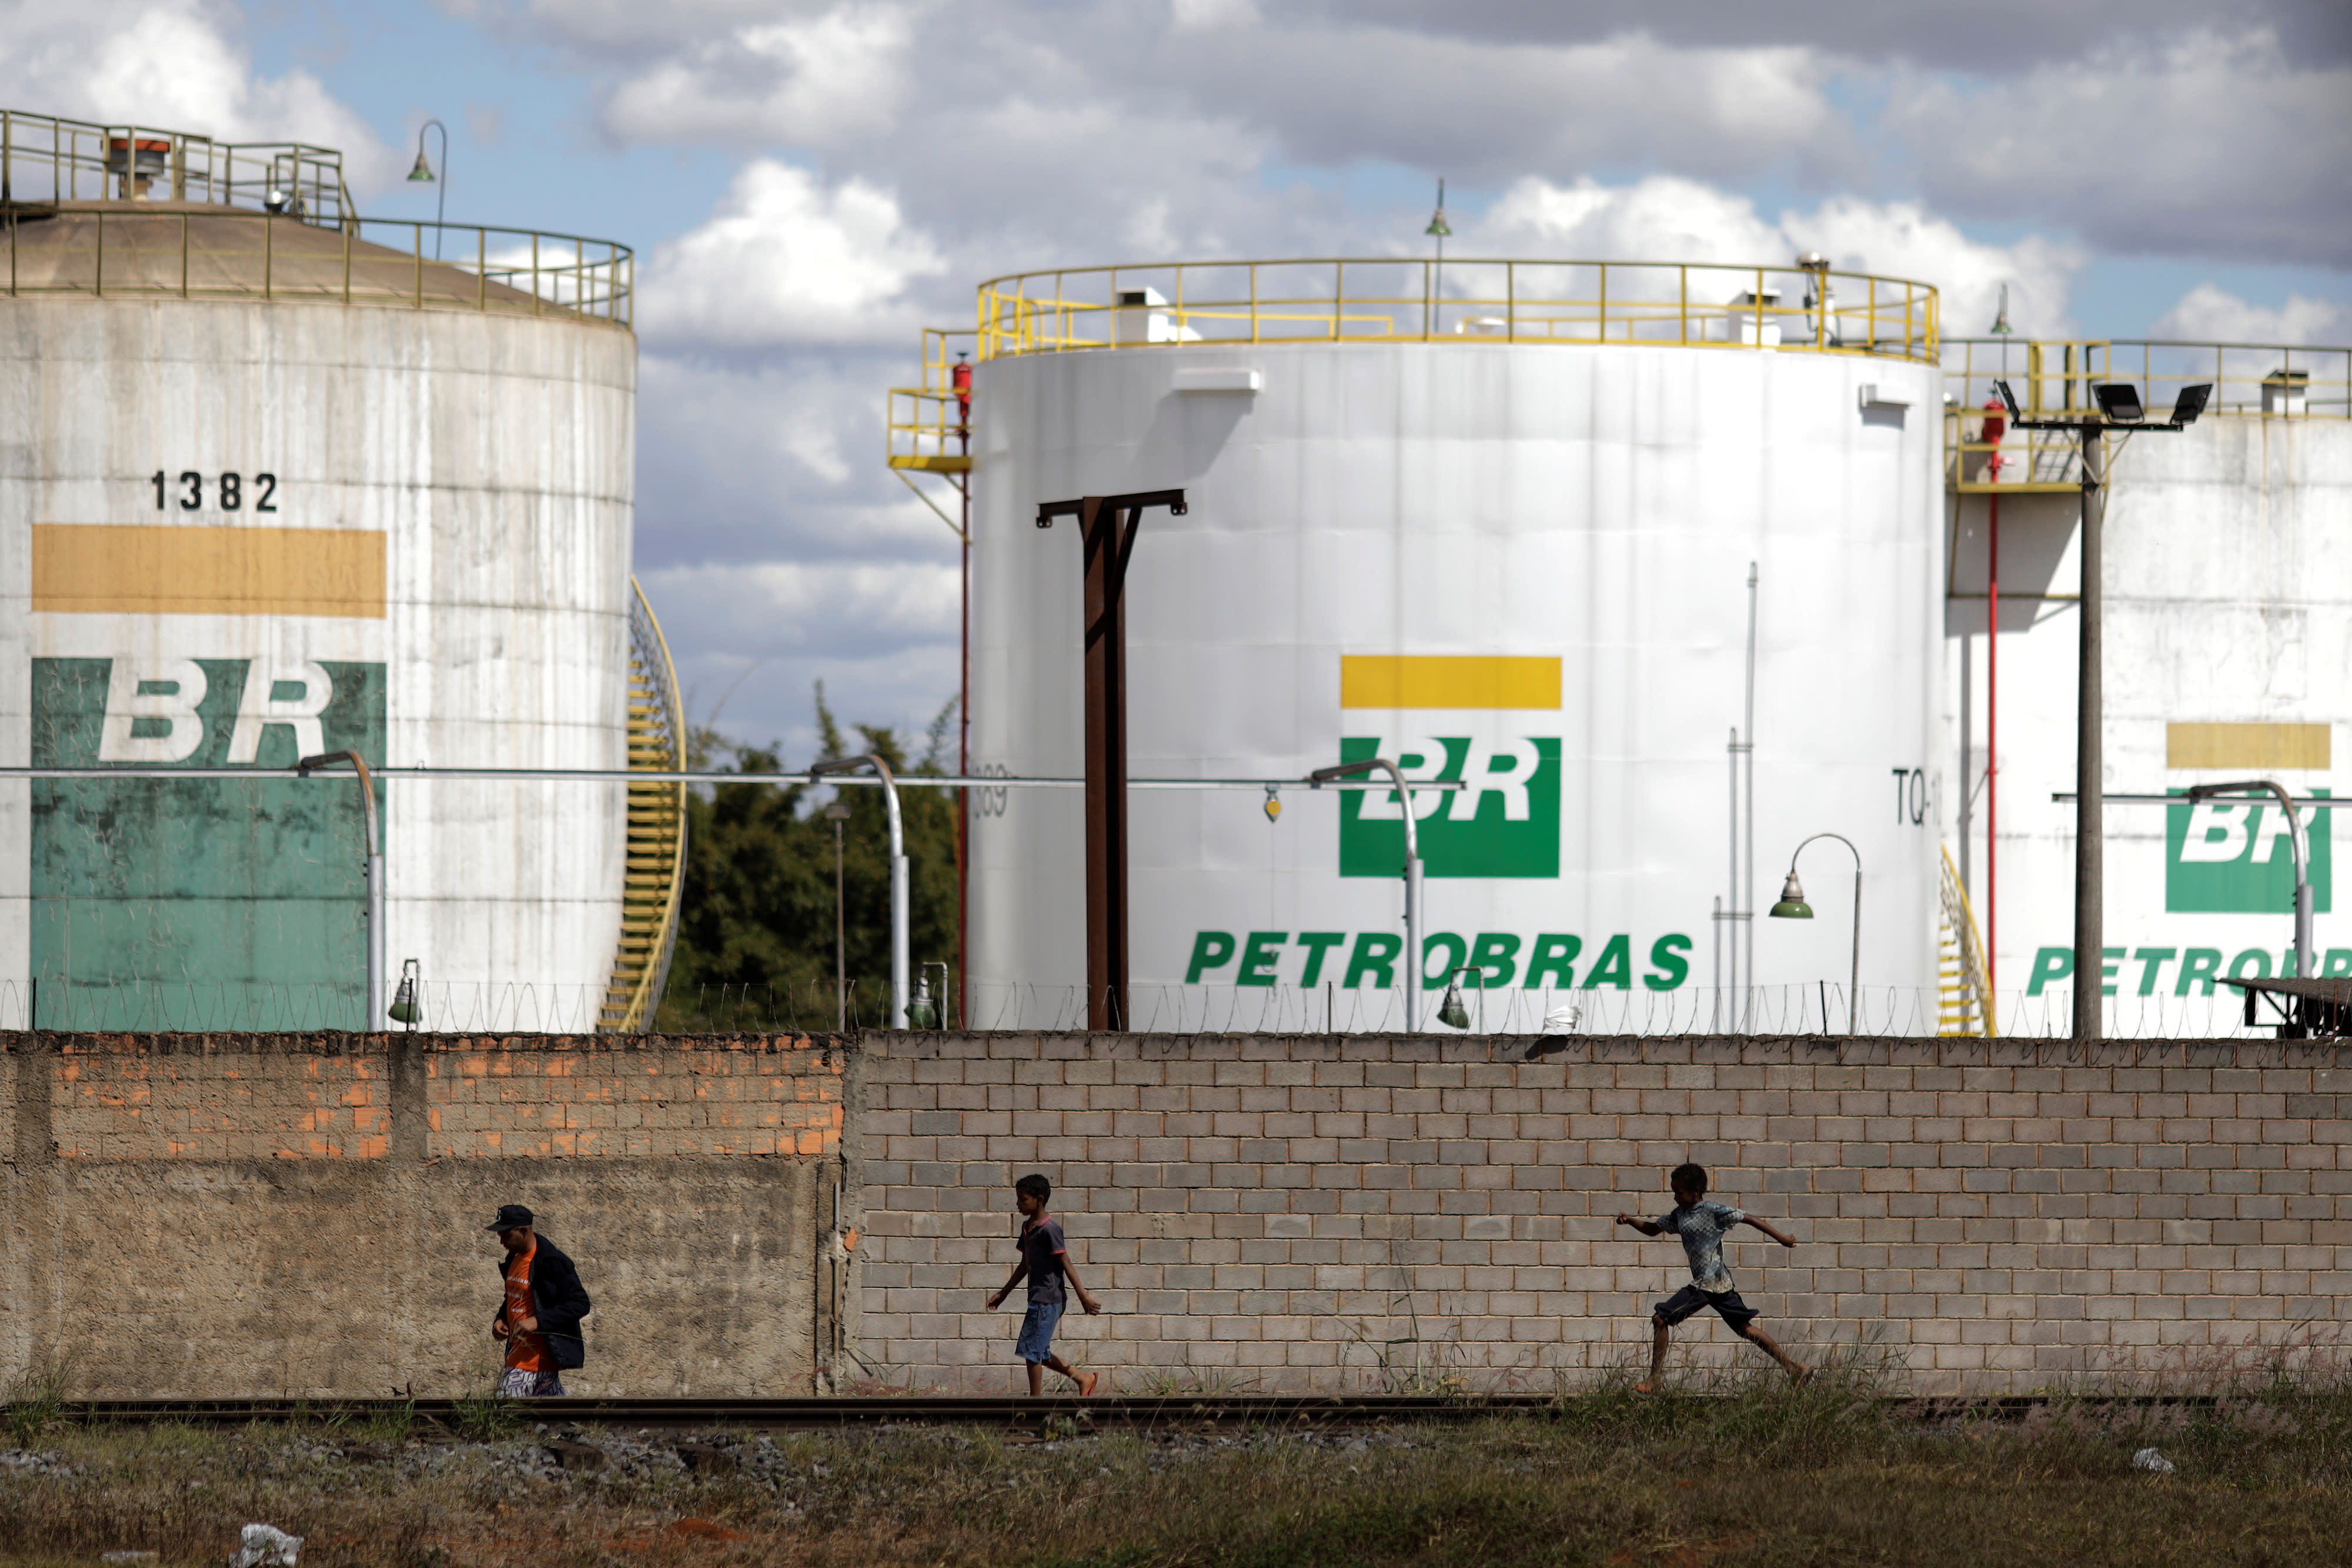 Buy this Brazilian oil stock on the strength of its dividend potential, Morgan Stanley says